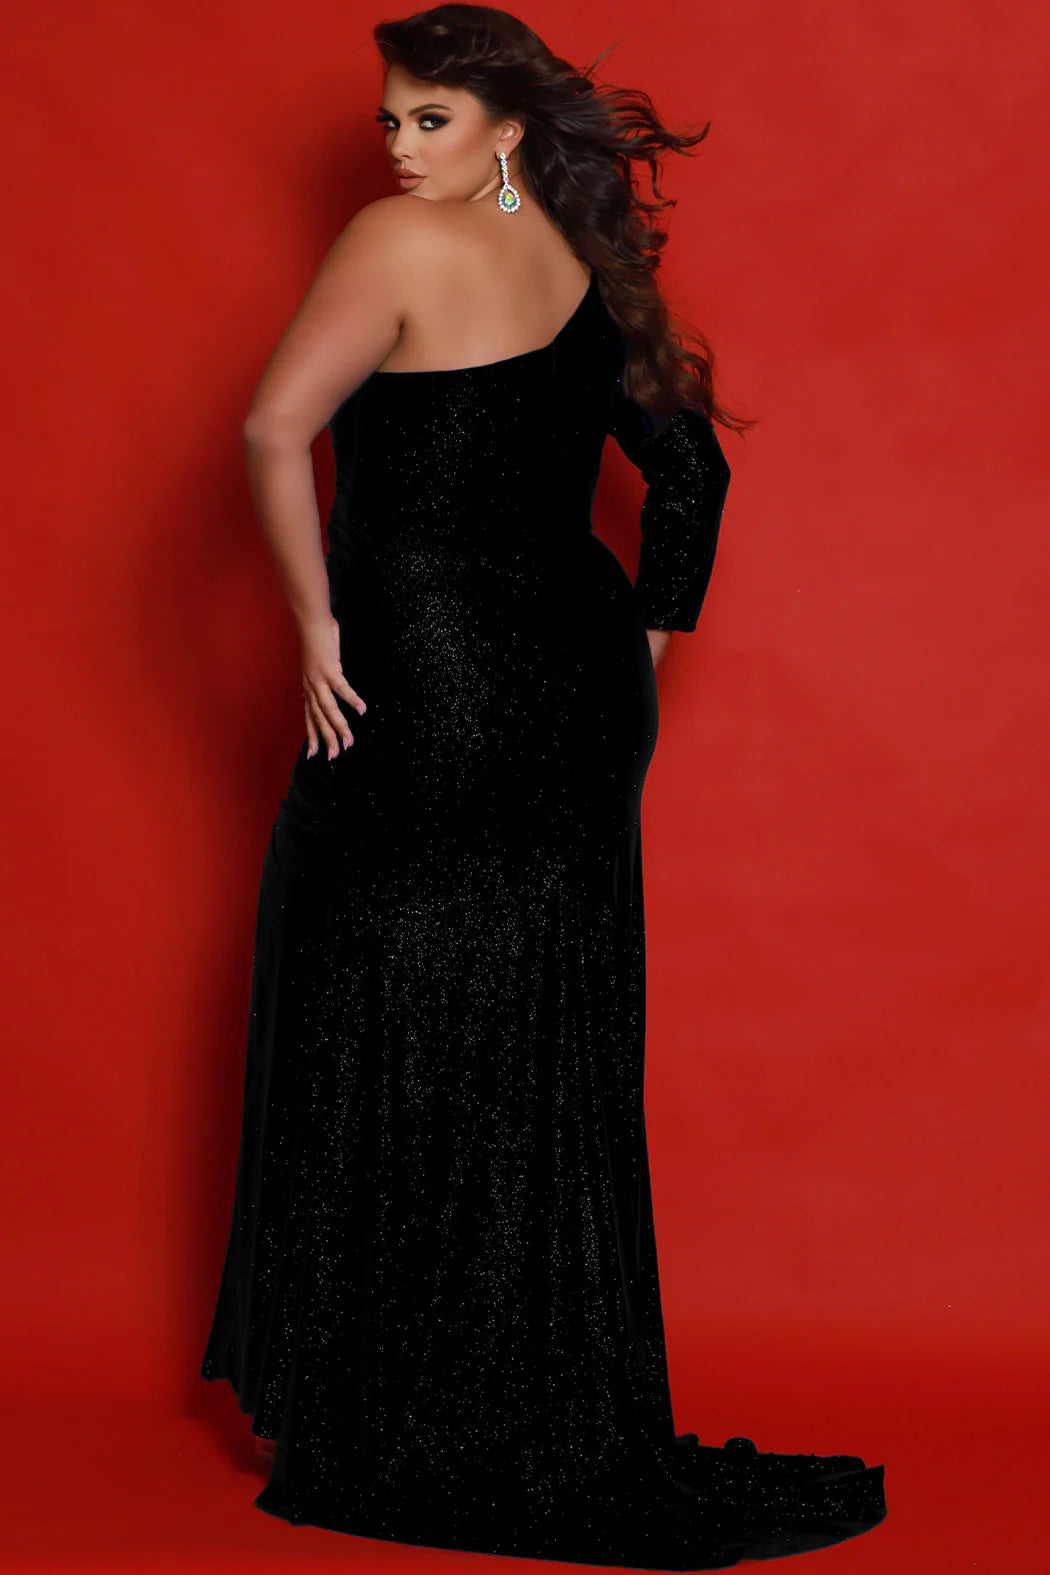 The Sydneys Closet JK2410 Dress features an off-shoulder design with a dramatic slit and fringe details. Ruched for an elegant fit, this shimmer jersey dress will make a statement on any pageant stage. Plus size available. Unleash your inner diva at Prom 2024 or any formal event in this sleek, curve-hugging plus size evening gown packed with glamourous design details. The Beamer fitted formal dress sparkles in shimmering stretch Lycra that hugs your curves in all the right places.